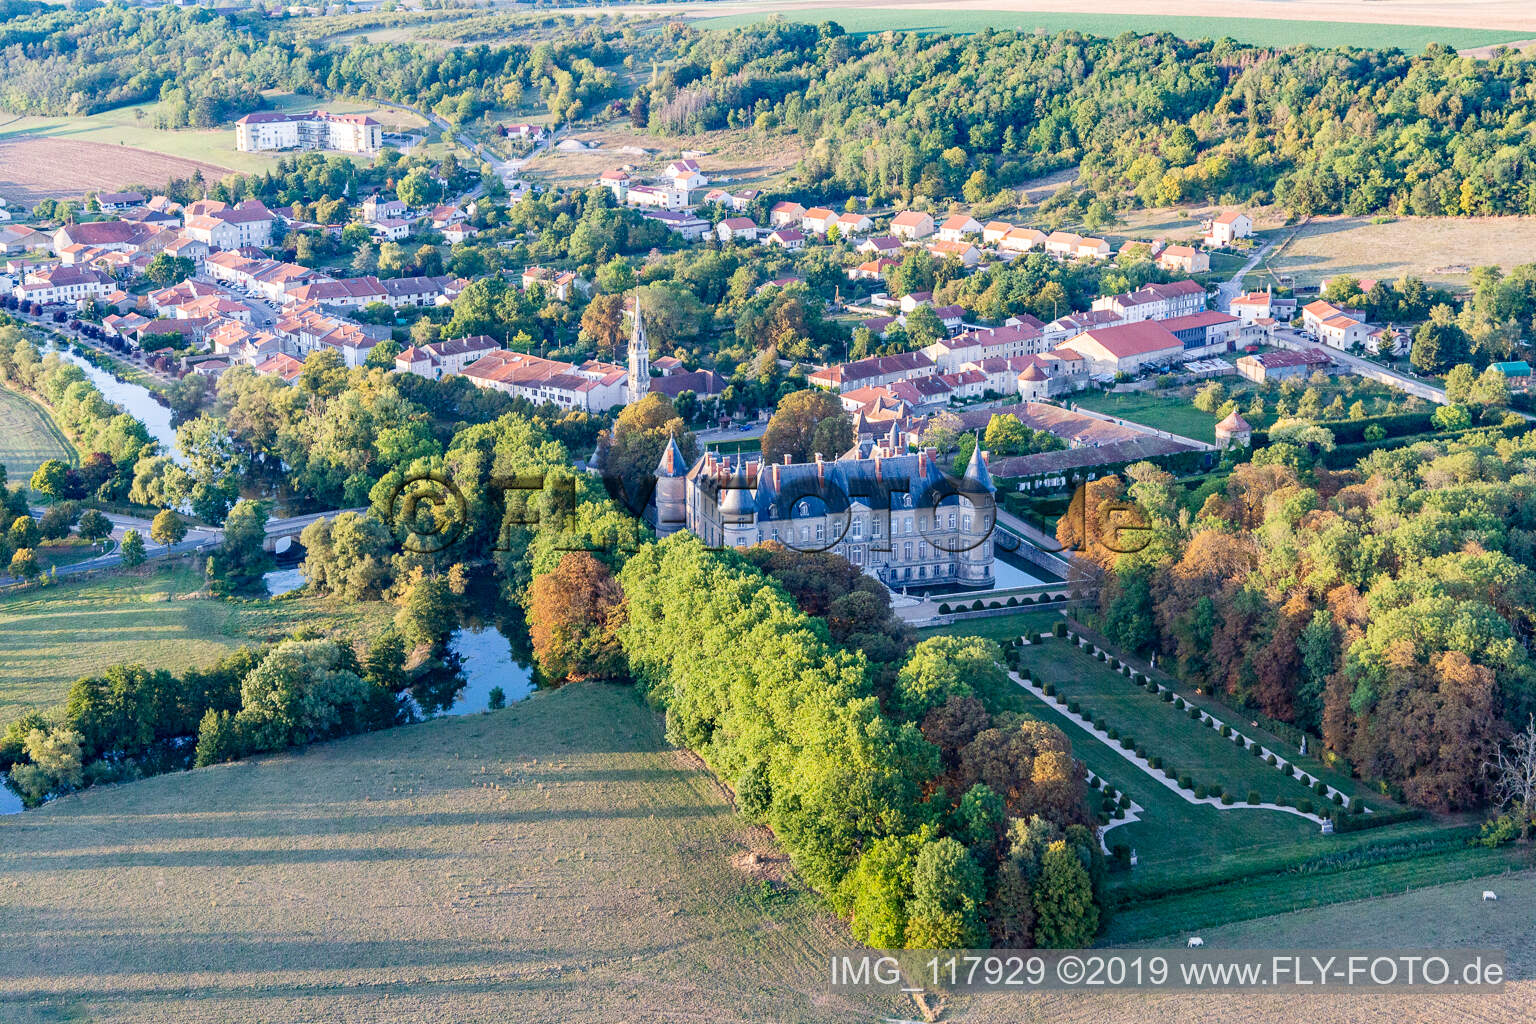 Chateau de Haroué in Haroué in the state Meurthe et Moselle, France from the drone perspective